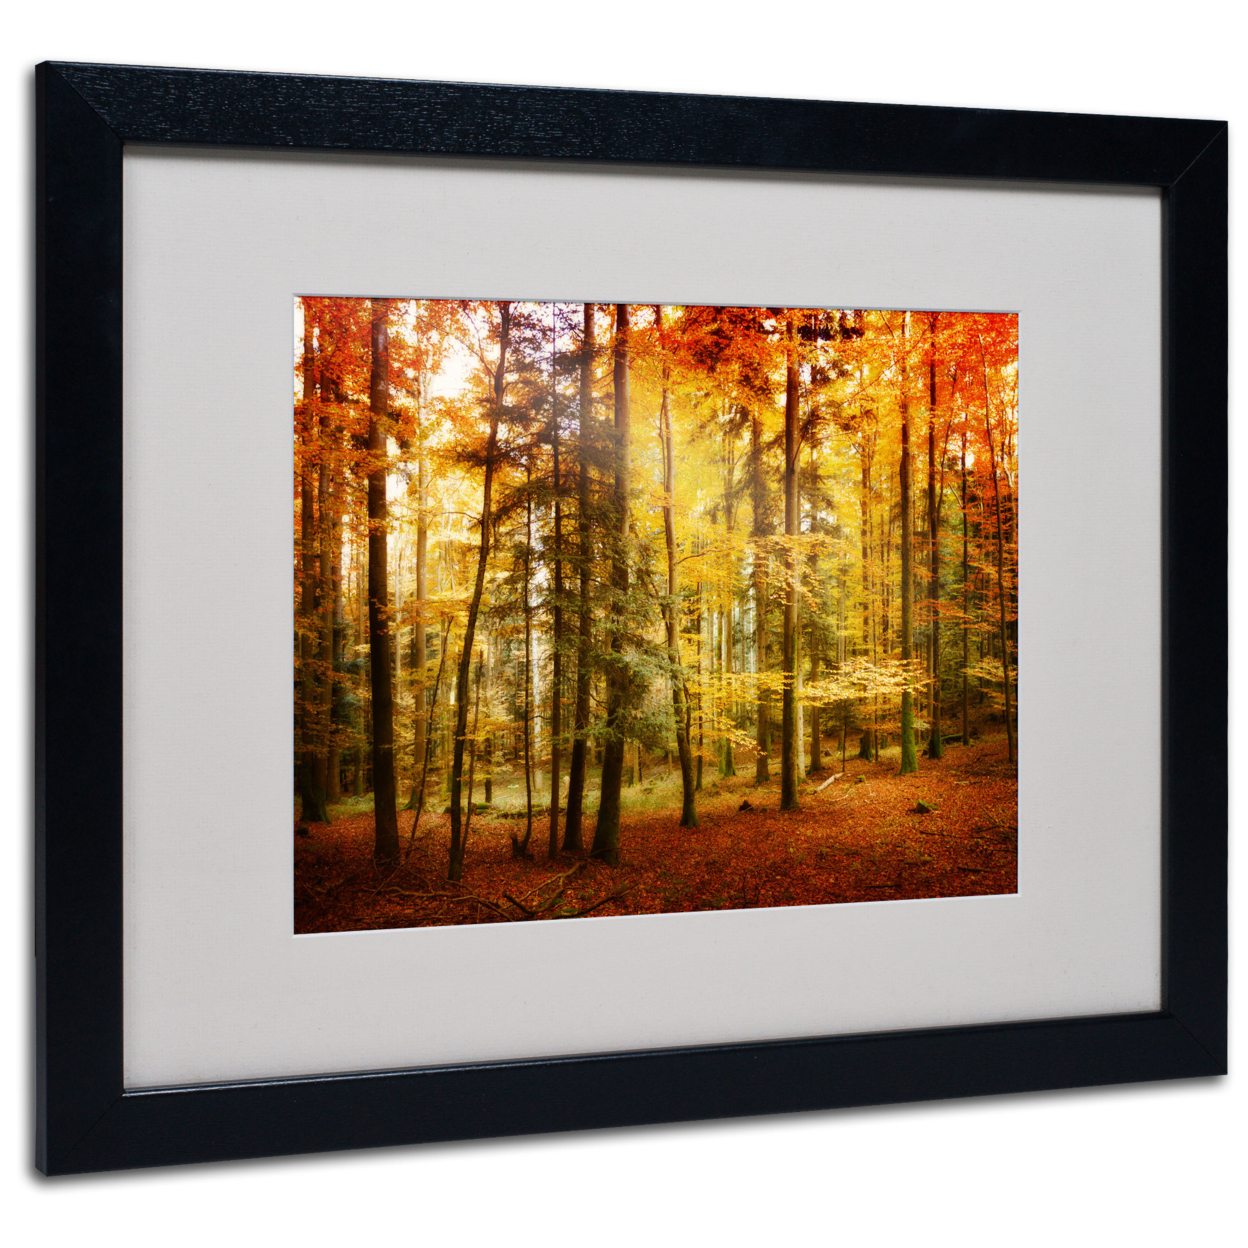 Philippe Sainte-Laudy 'Fall Color' Black Wooden Framed Art 18 X 22 Inches